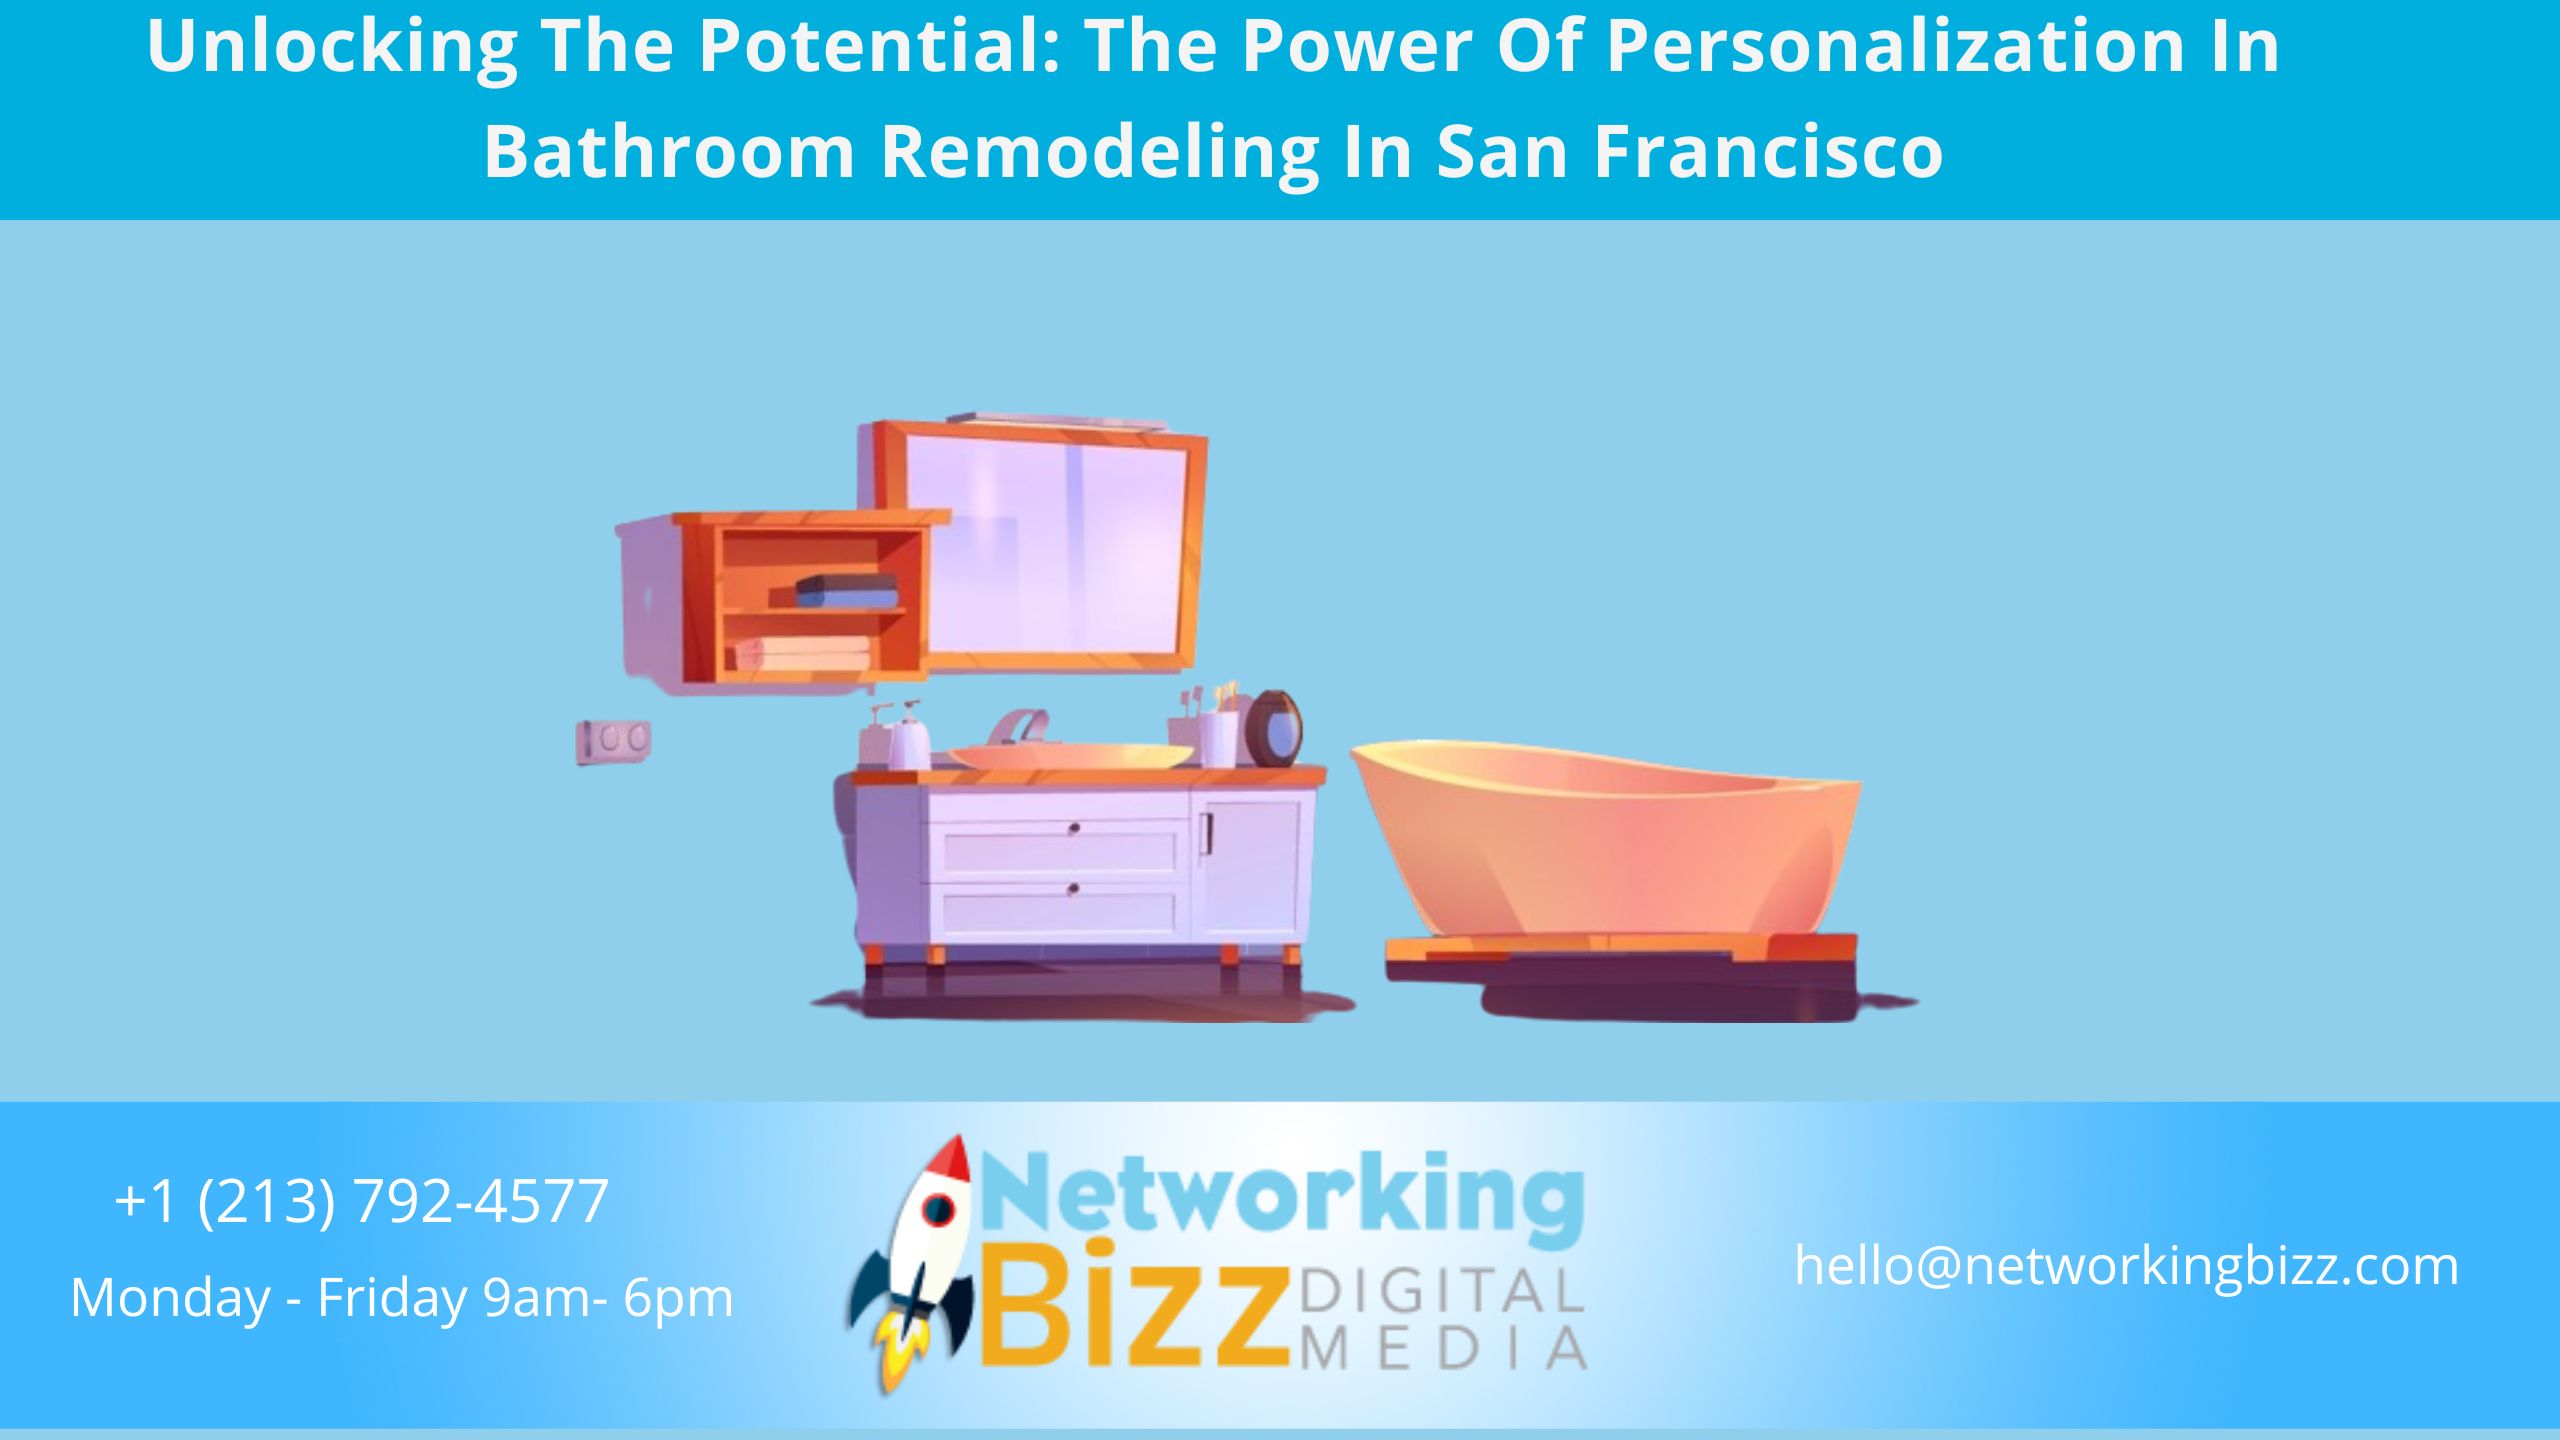 Unlocking The Potential: The Power Of Personalization In Bathroom Remodeling In San Francisco 